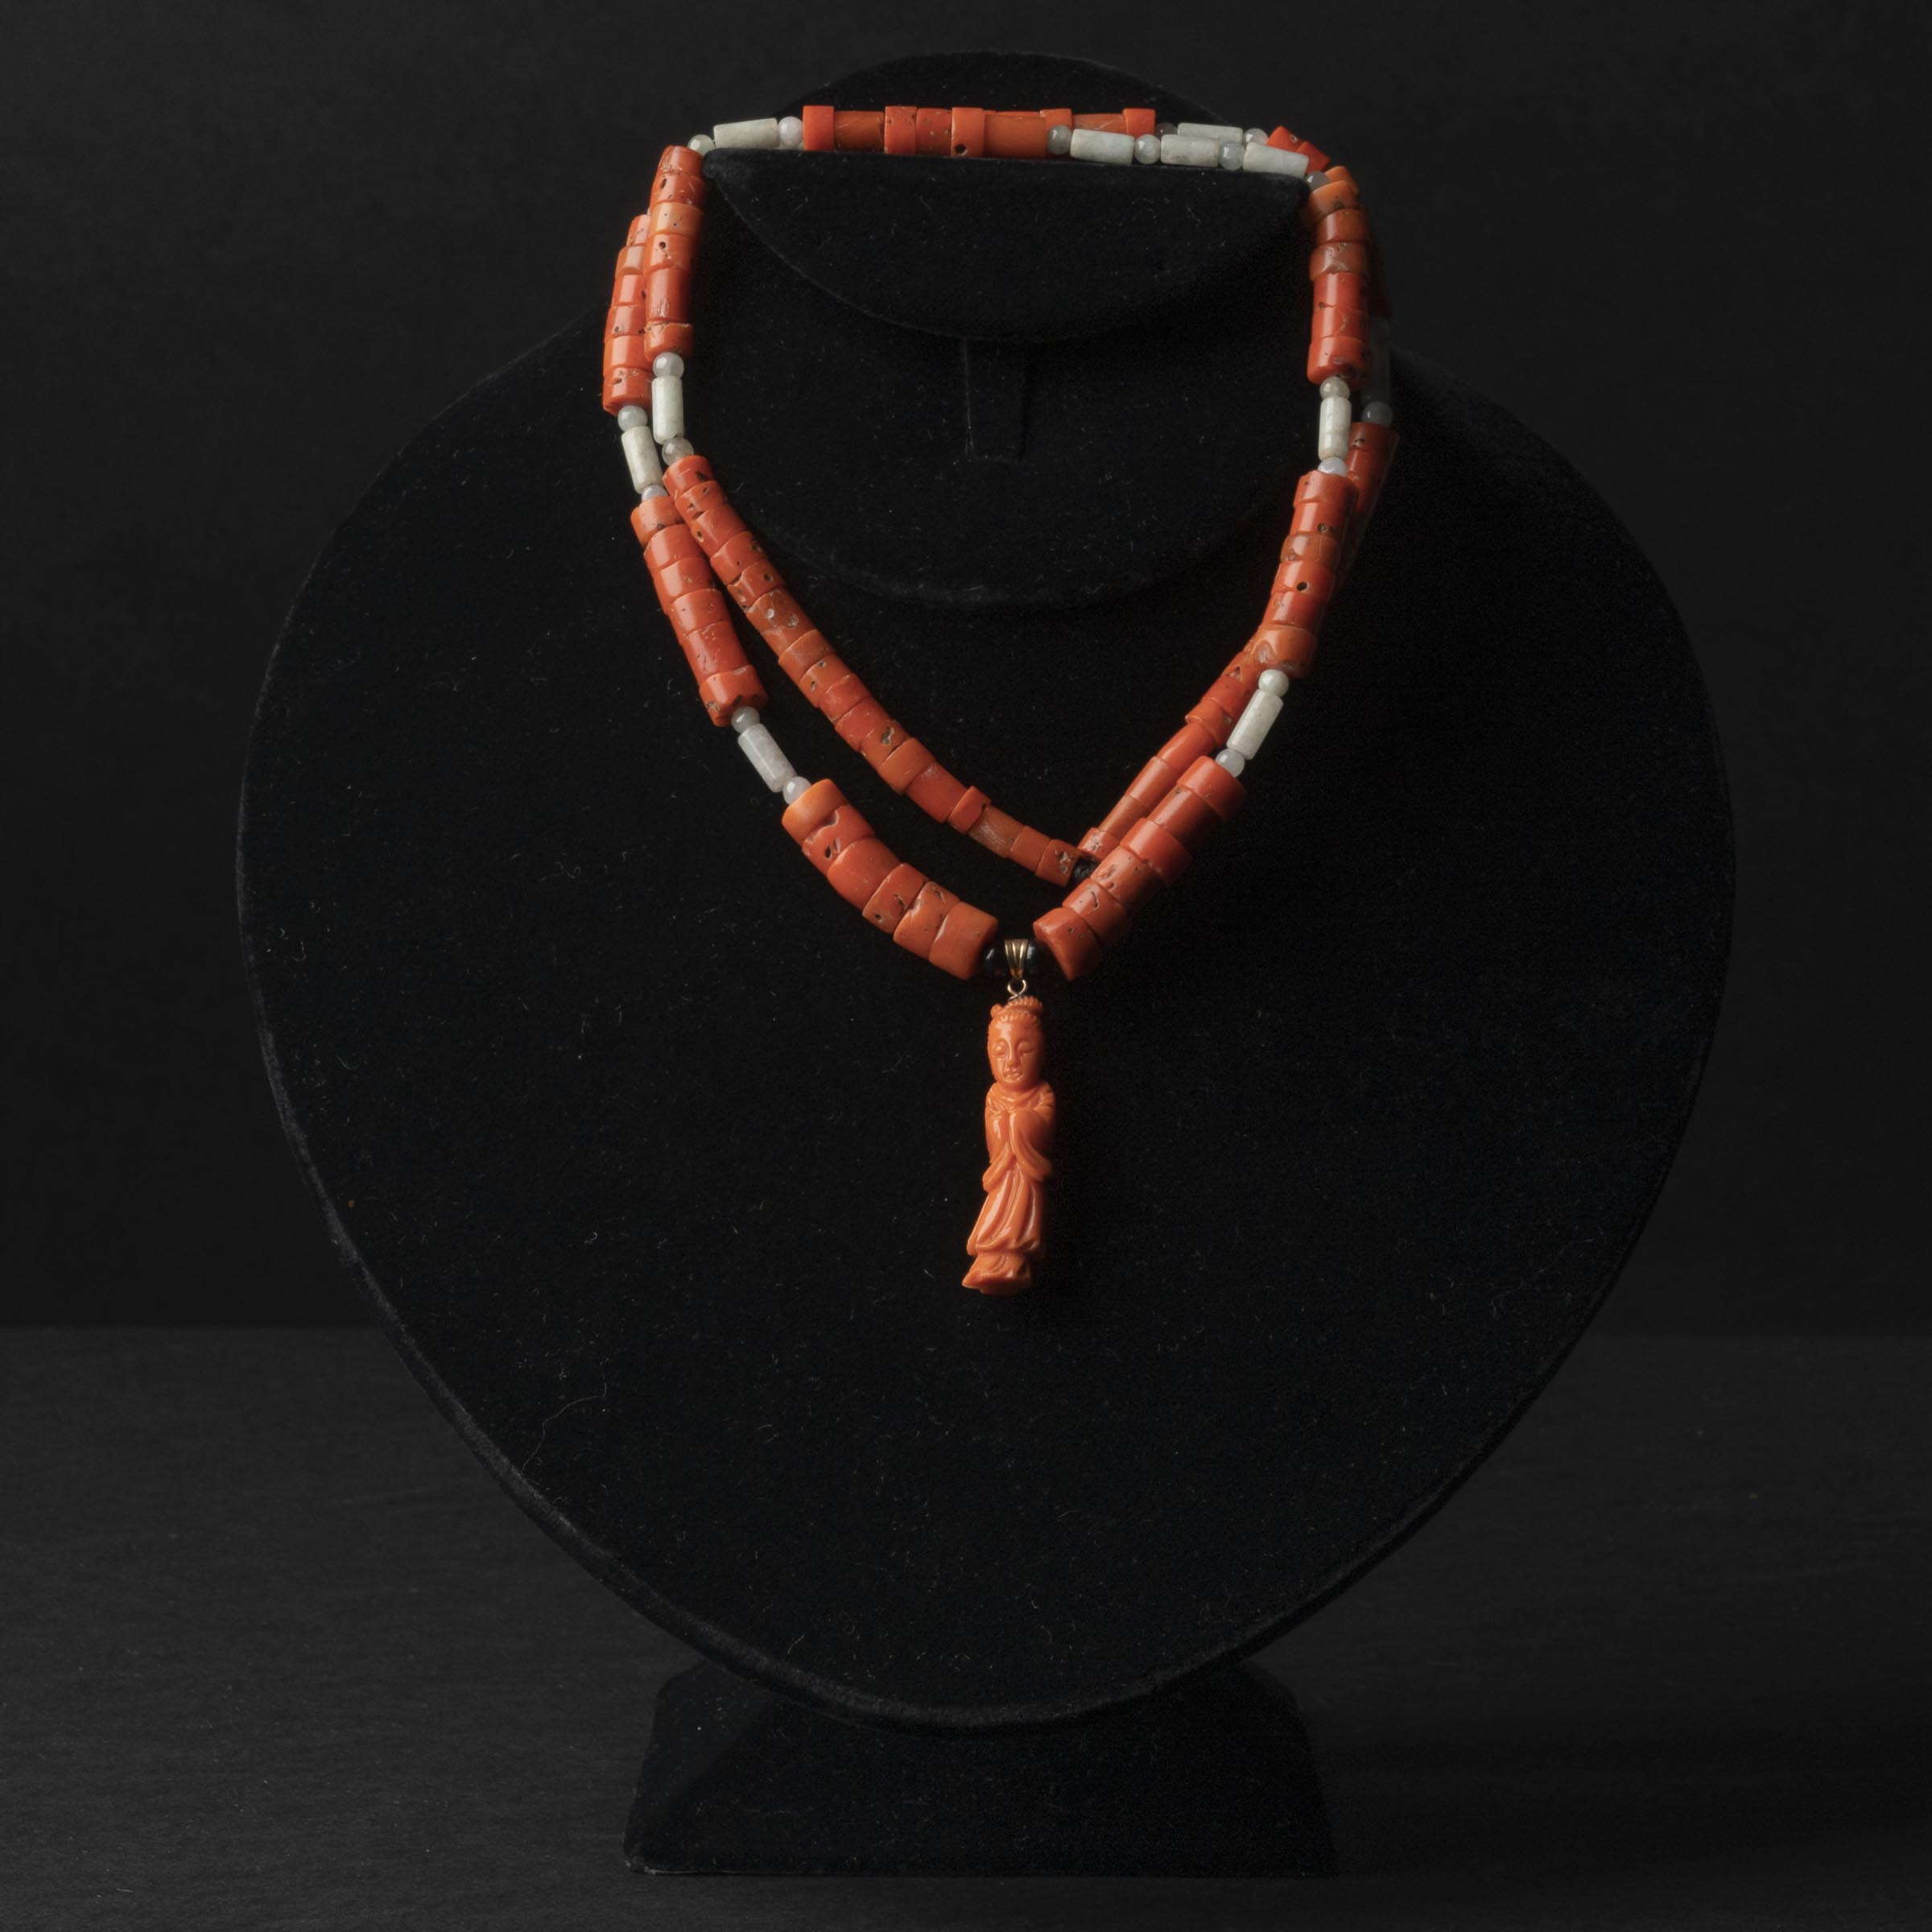 A Carved Coral Necklace With a Carved Coral 'Beauty' Figural Pendant, 19th Century